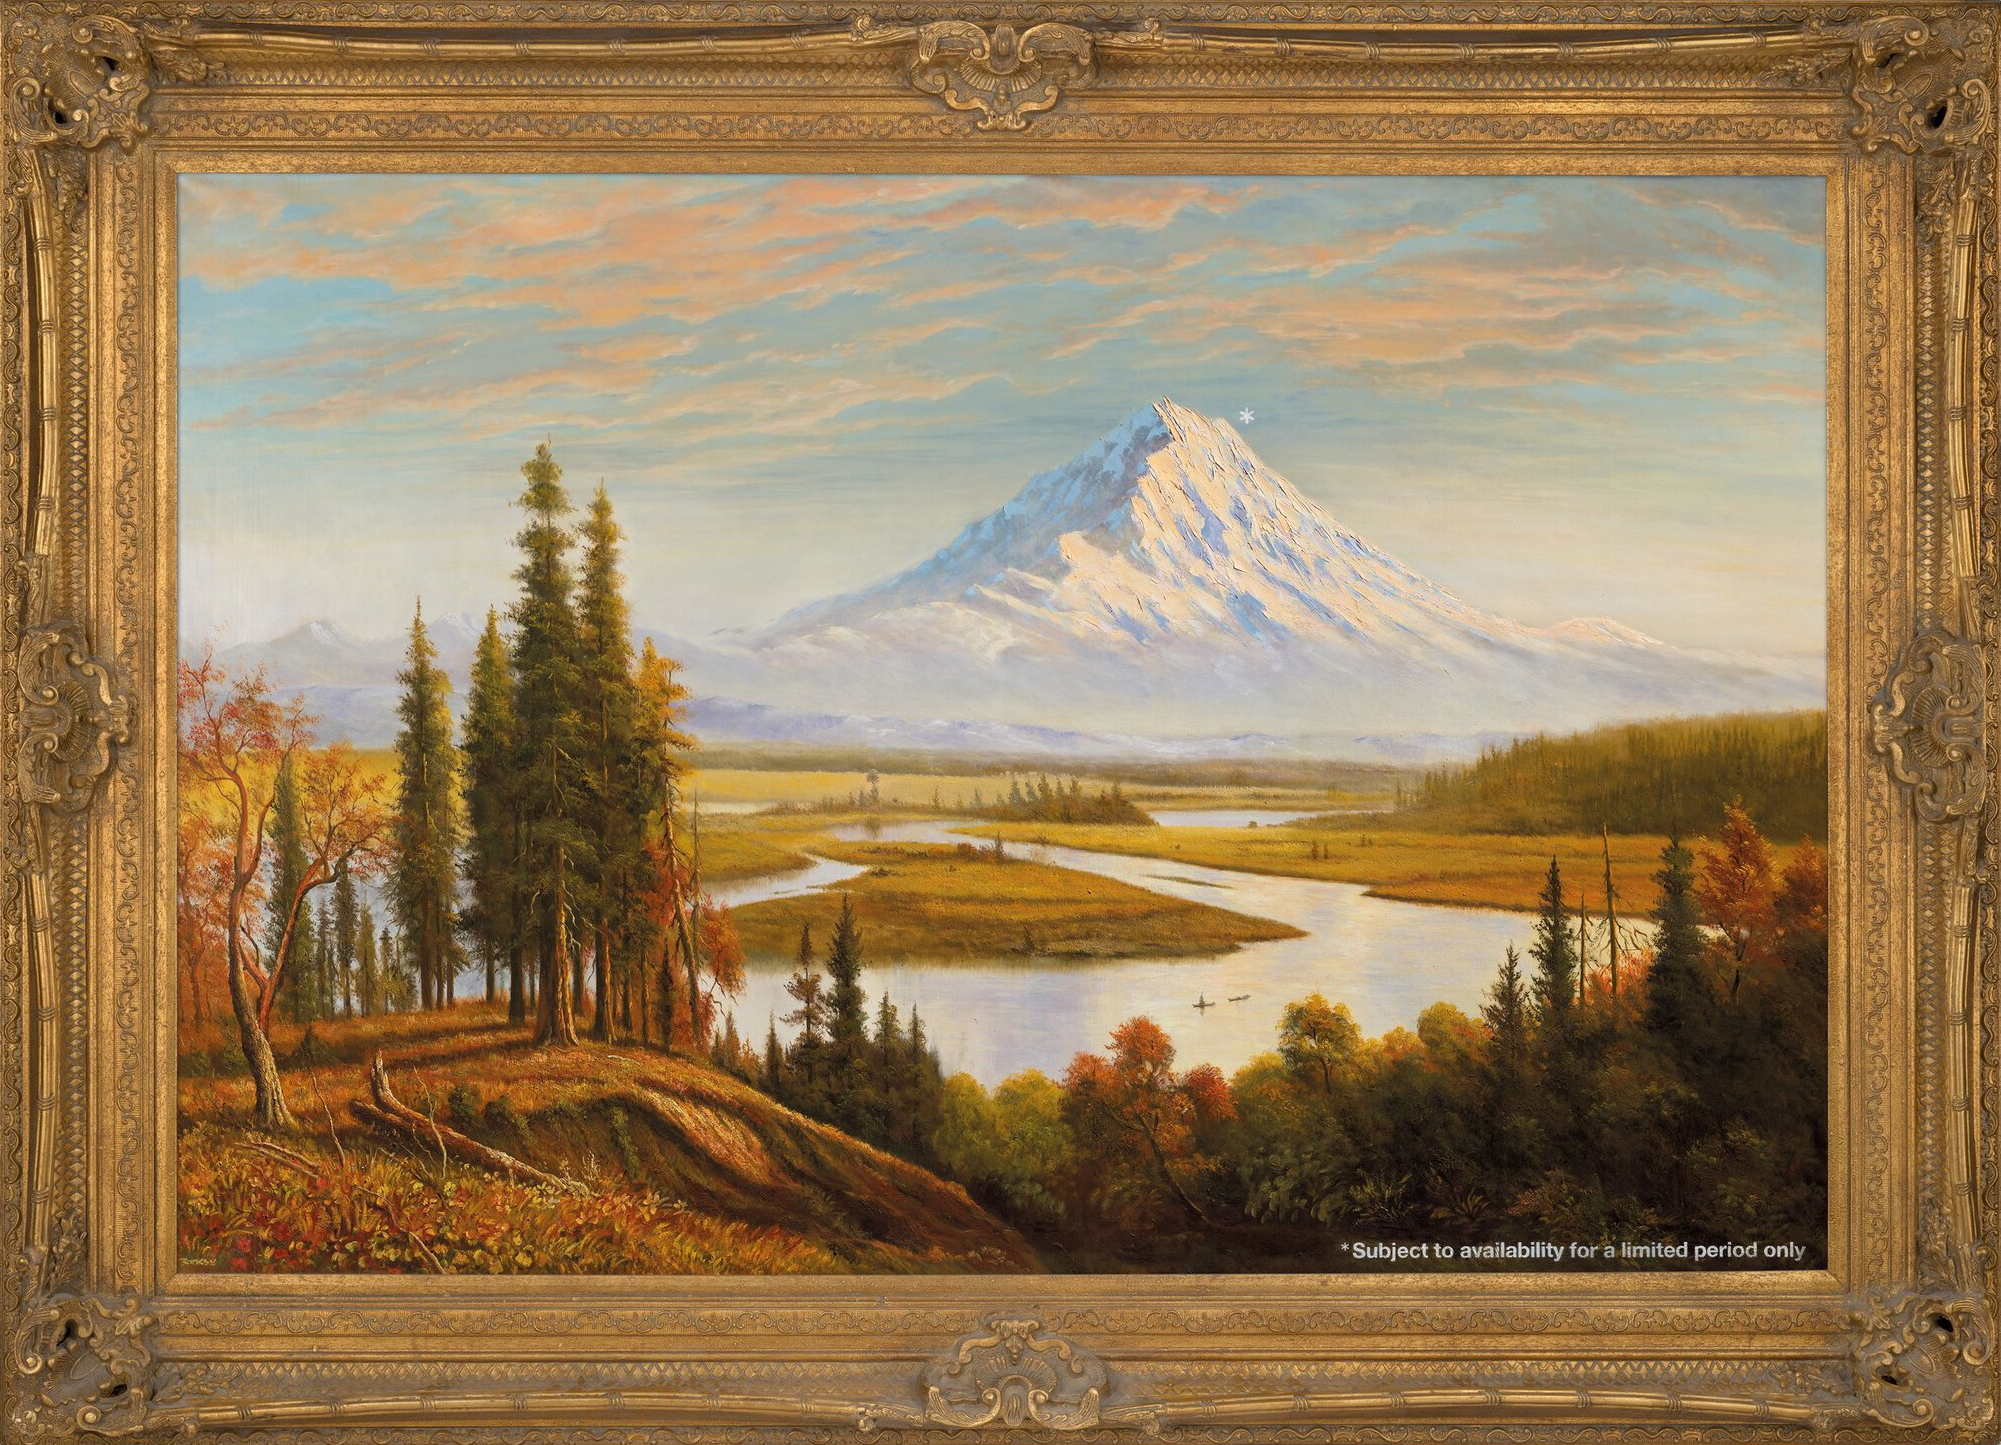 In a grim commentary on climate change, in 2009, British artist Banksy creatively vandalized this 1890 painting by Hudson River School painter Albert Bierstadt. The artwork, now titled Subject to Availability, has a surprise for Northwest locals — Mount Rainier. It sold at auction Wednesday, 28 June 2021, for 4,582,500 pounds, or $6,342,180. Photo: Christie’s Images Limited 2021